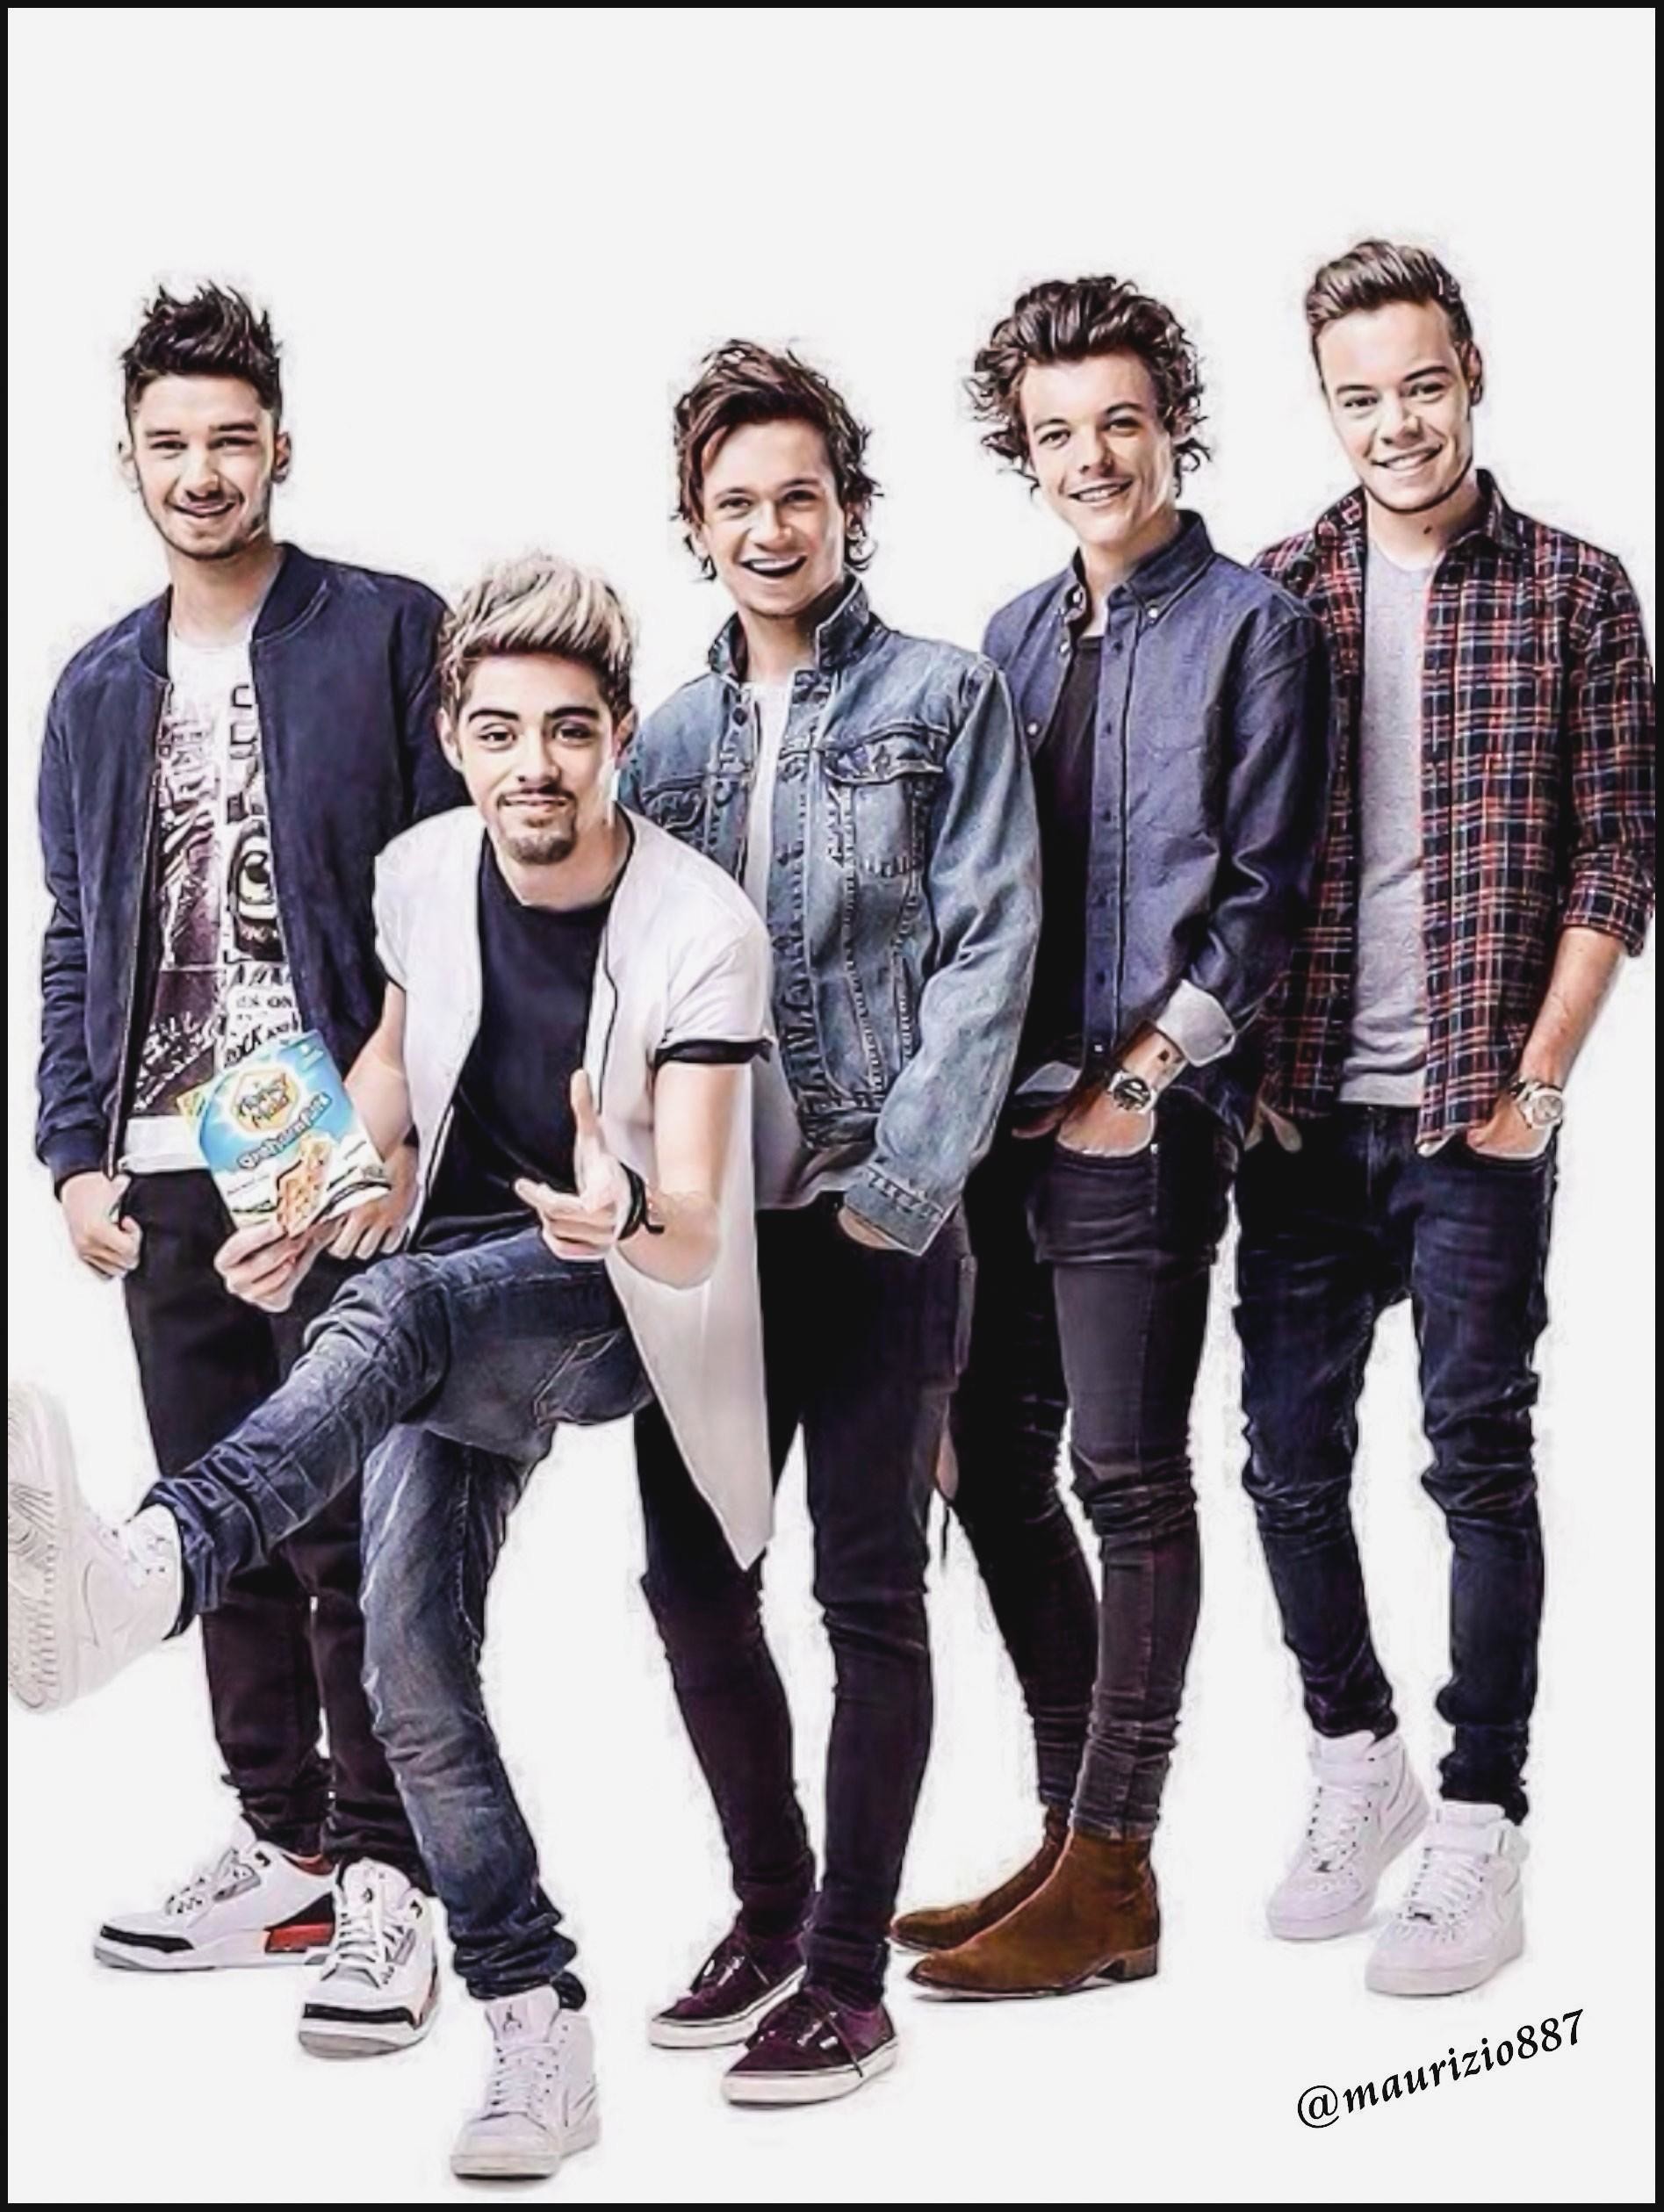 One Direction WallpaperAmazoncomAppstore for Android